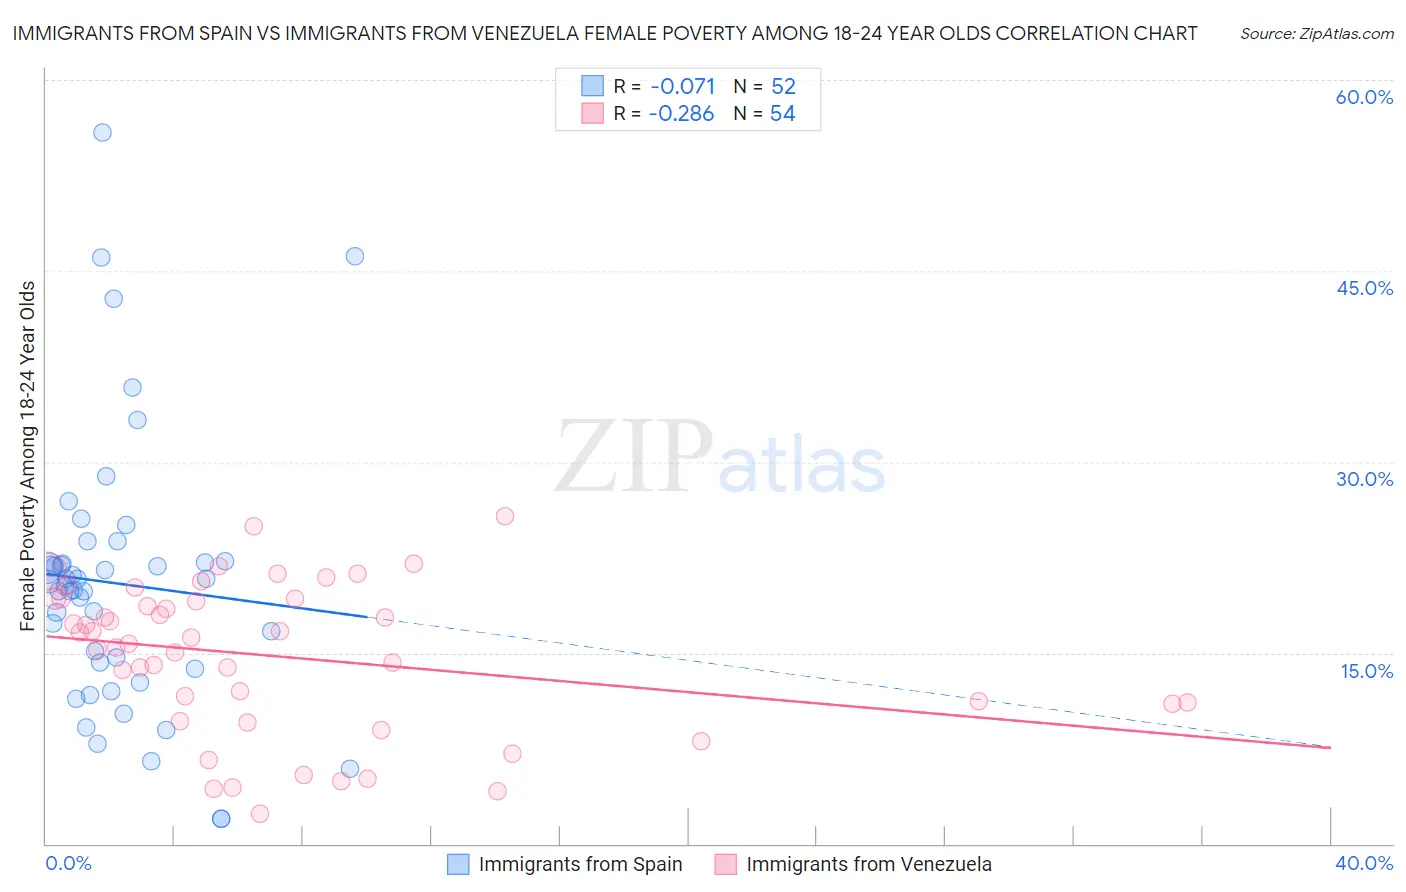 Immigrants from Spain vs Immigrants from Venezuela Female Poverty Among 18-24 Year Olds